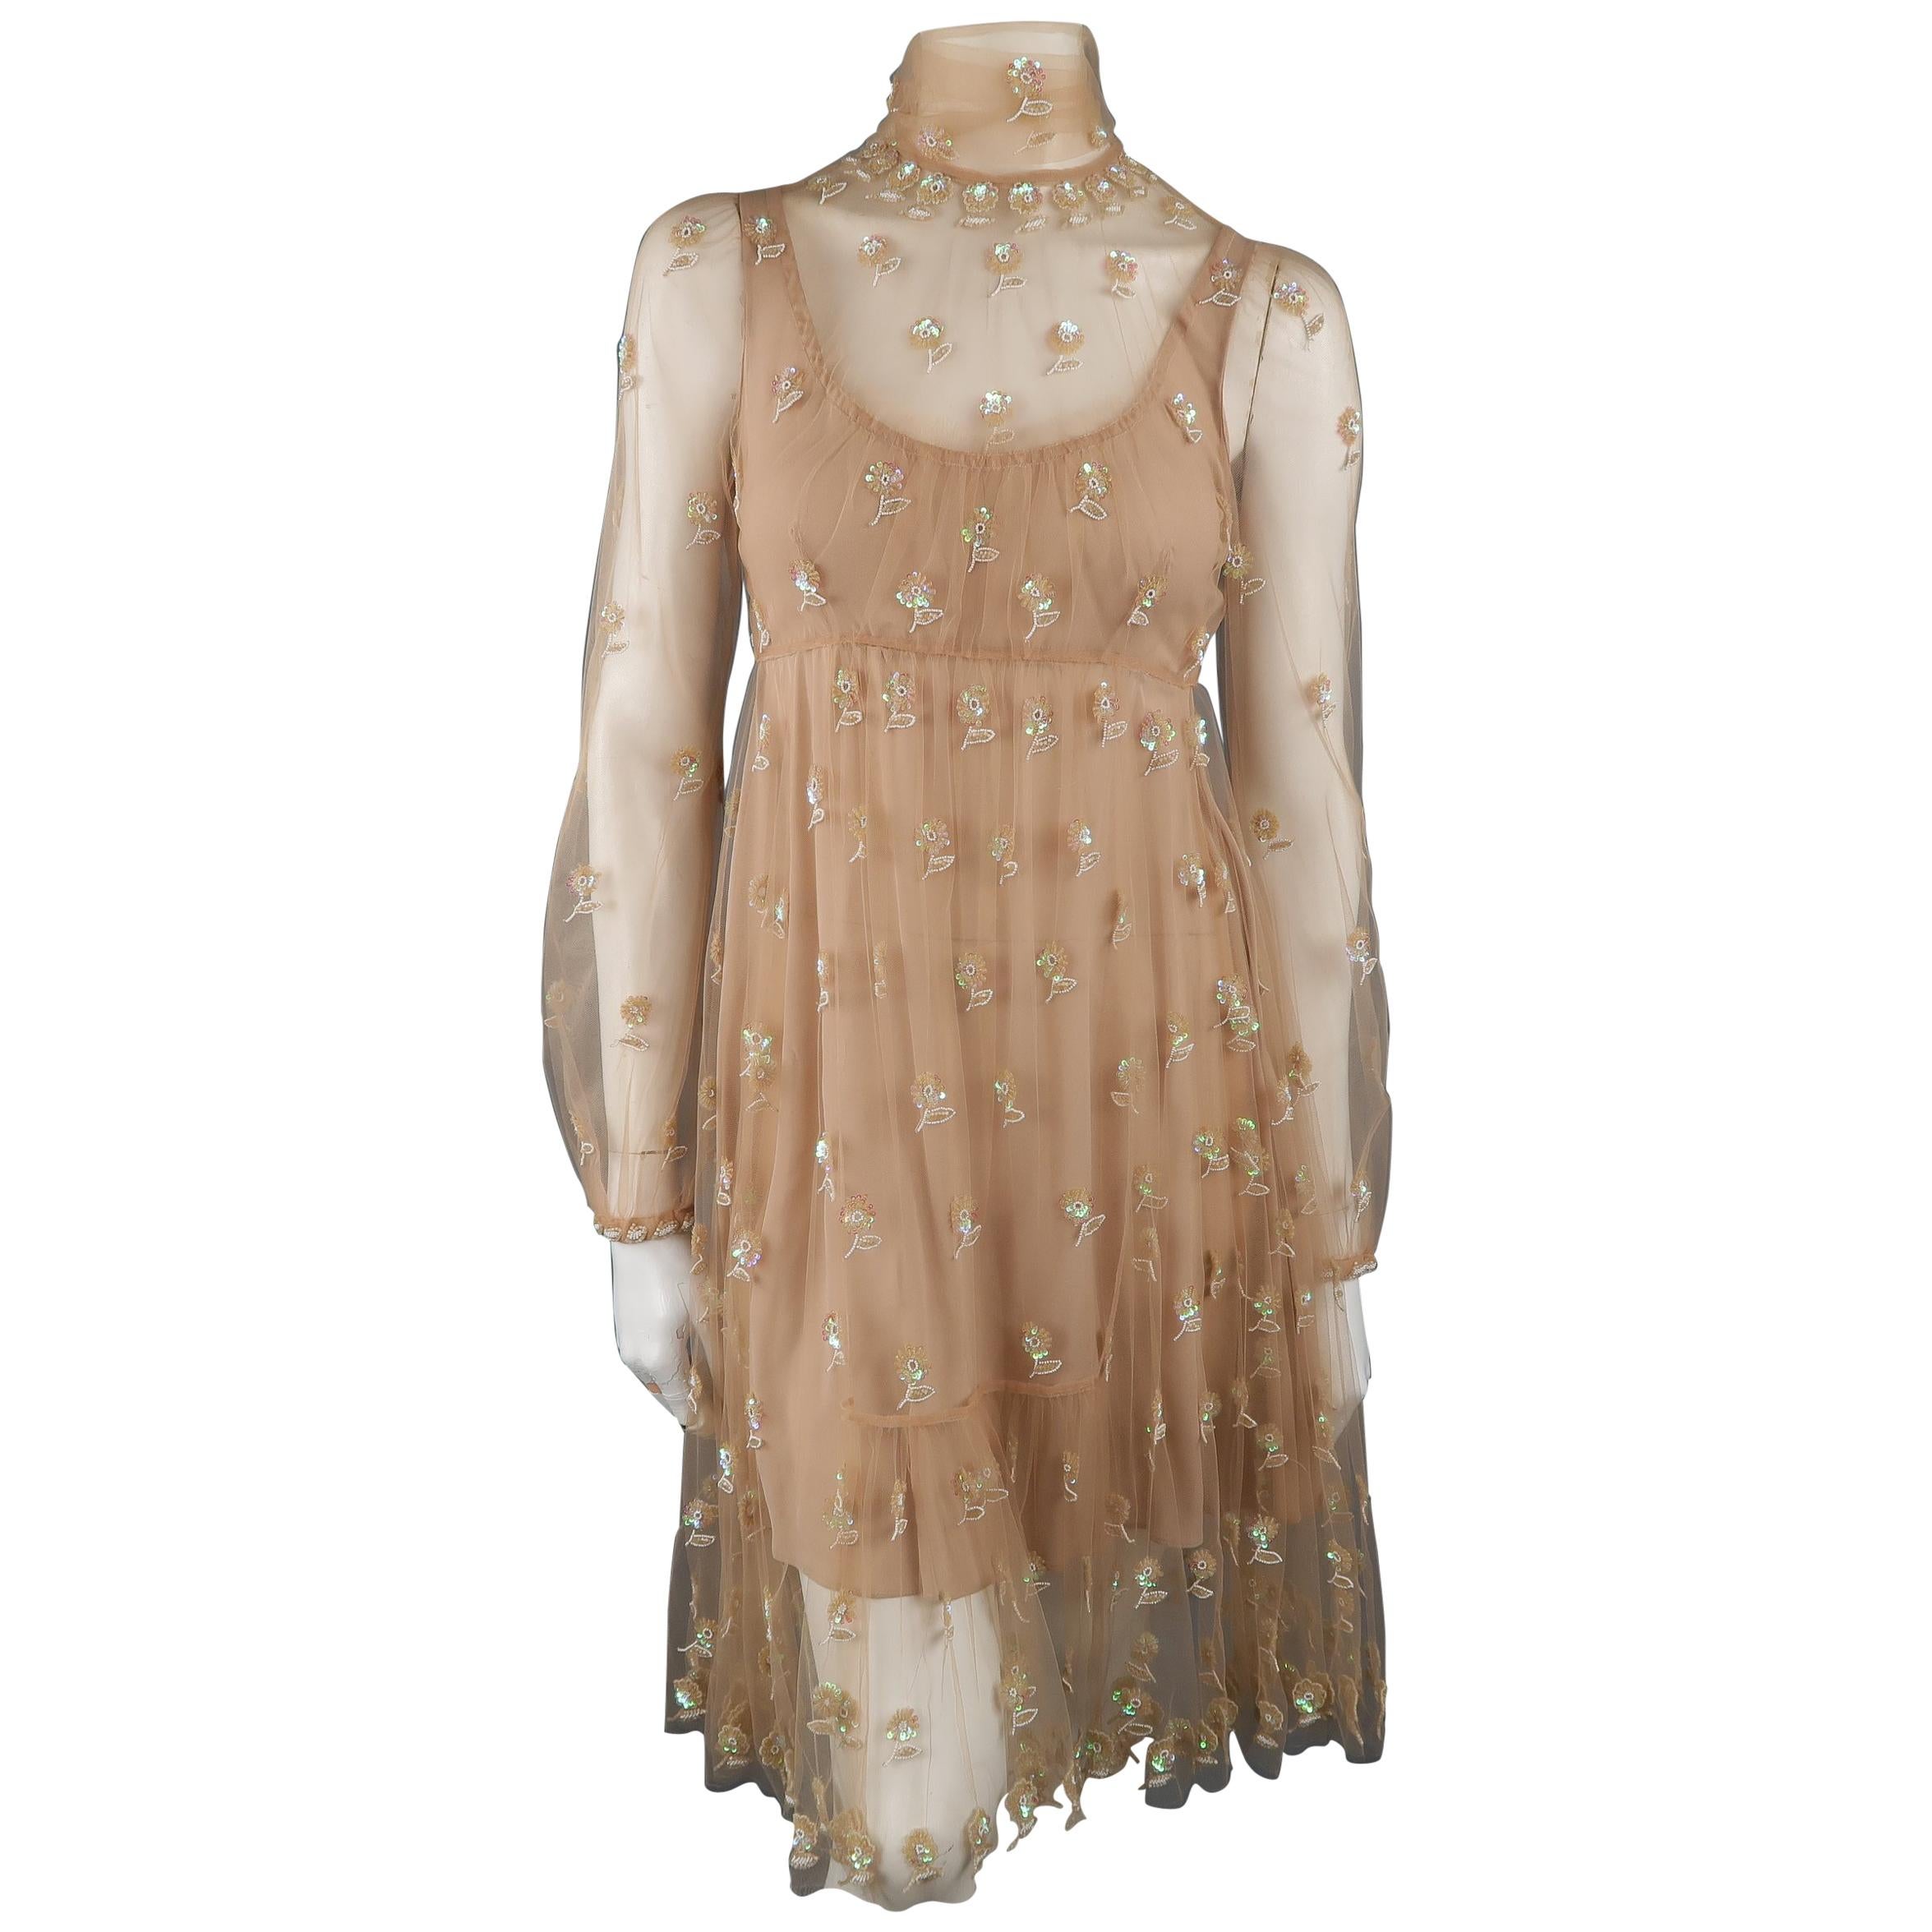 Valentino Dress - Tan Floral Beaded Tulle Scarf Cocktail Dress